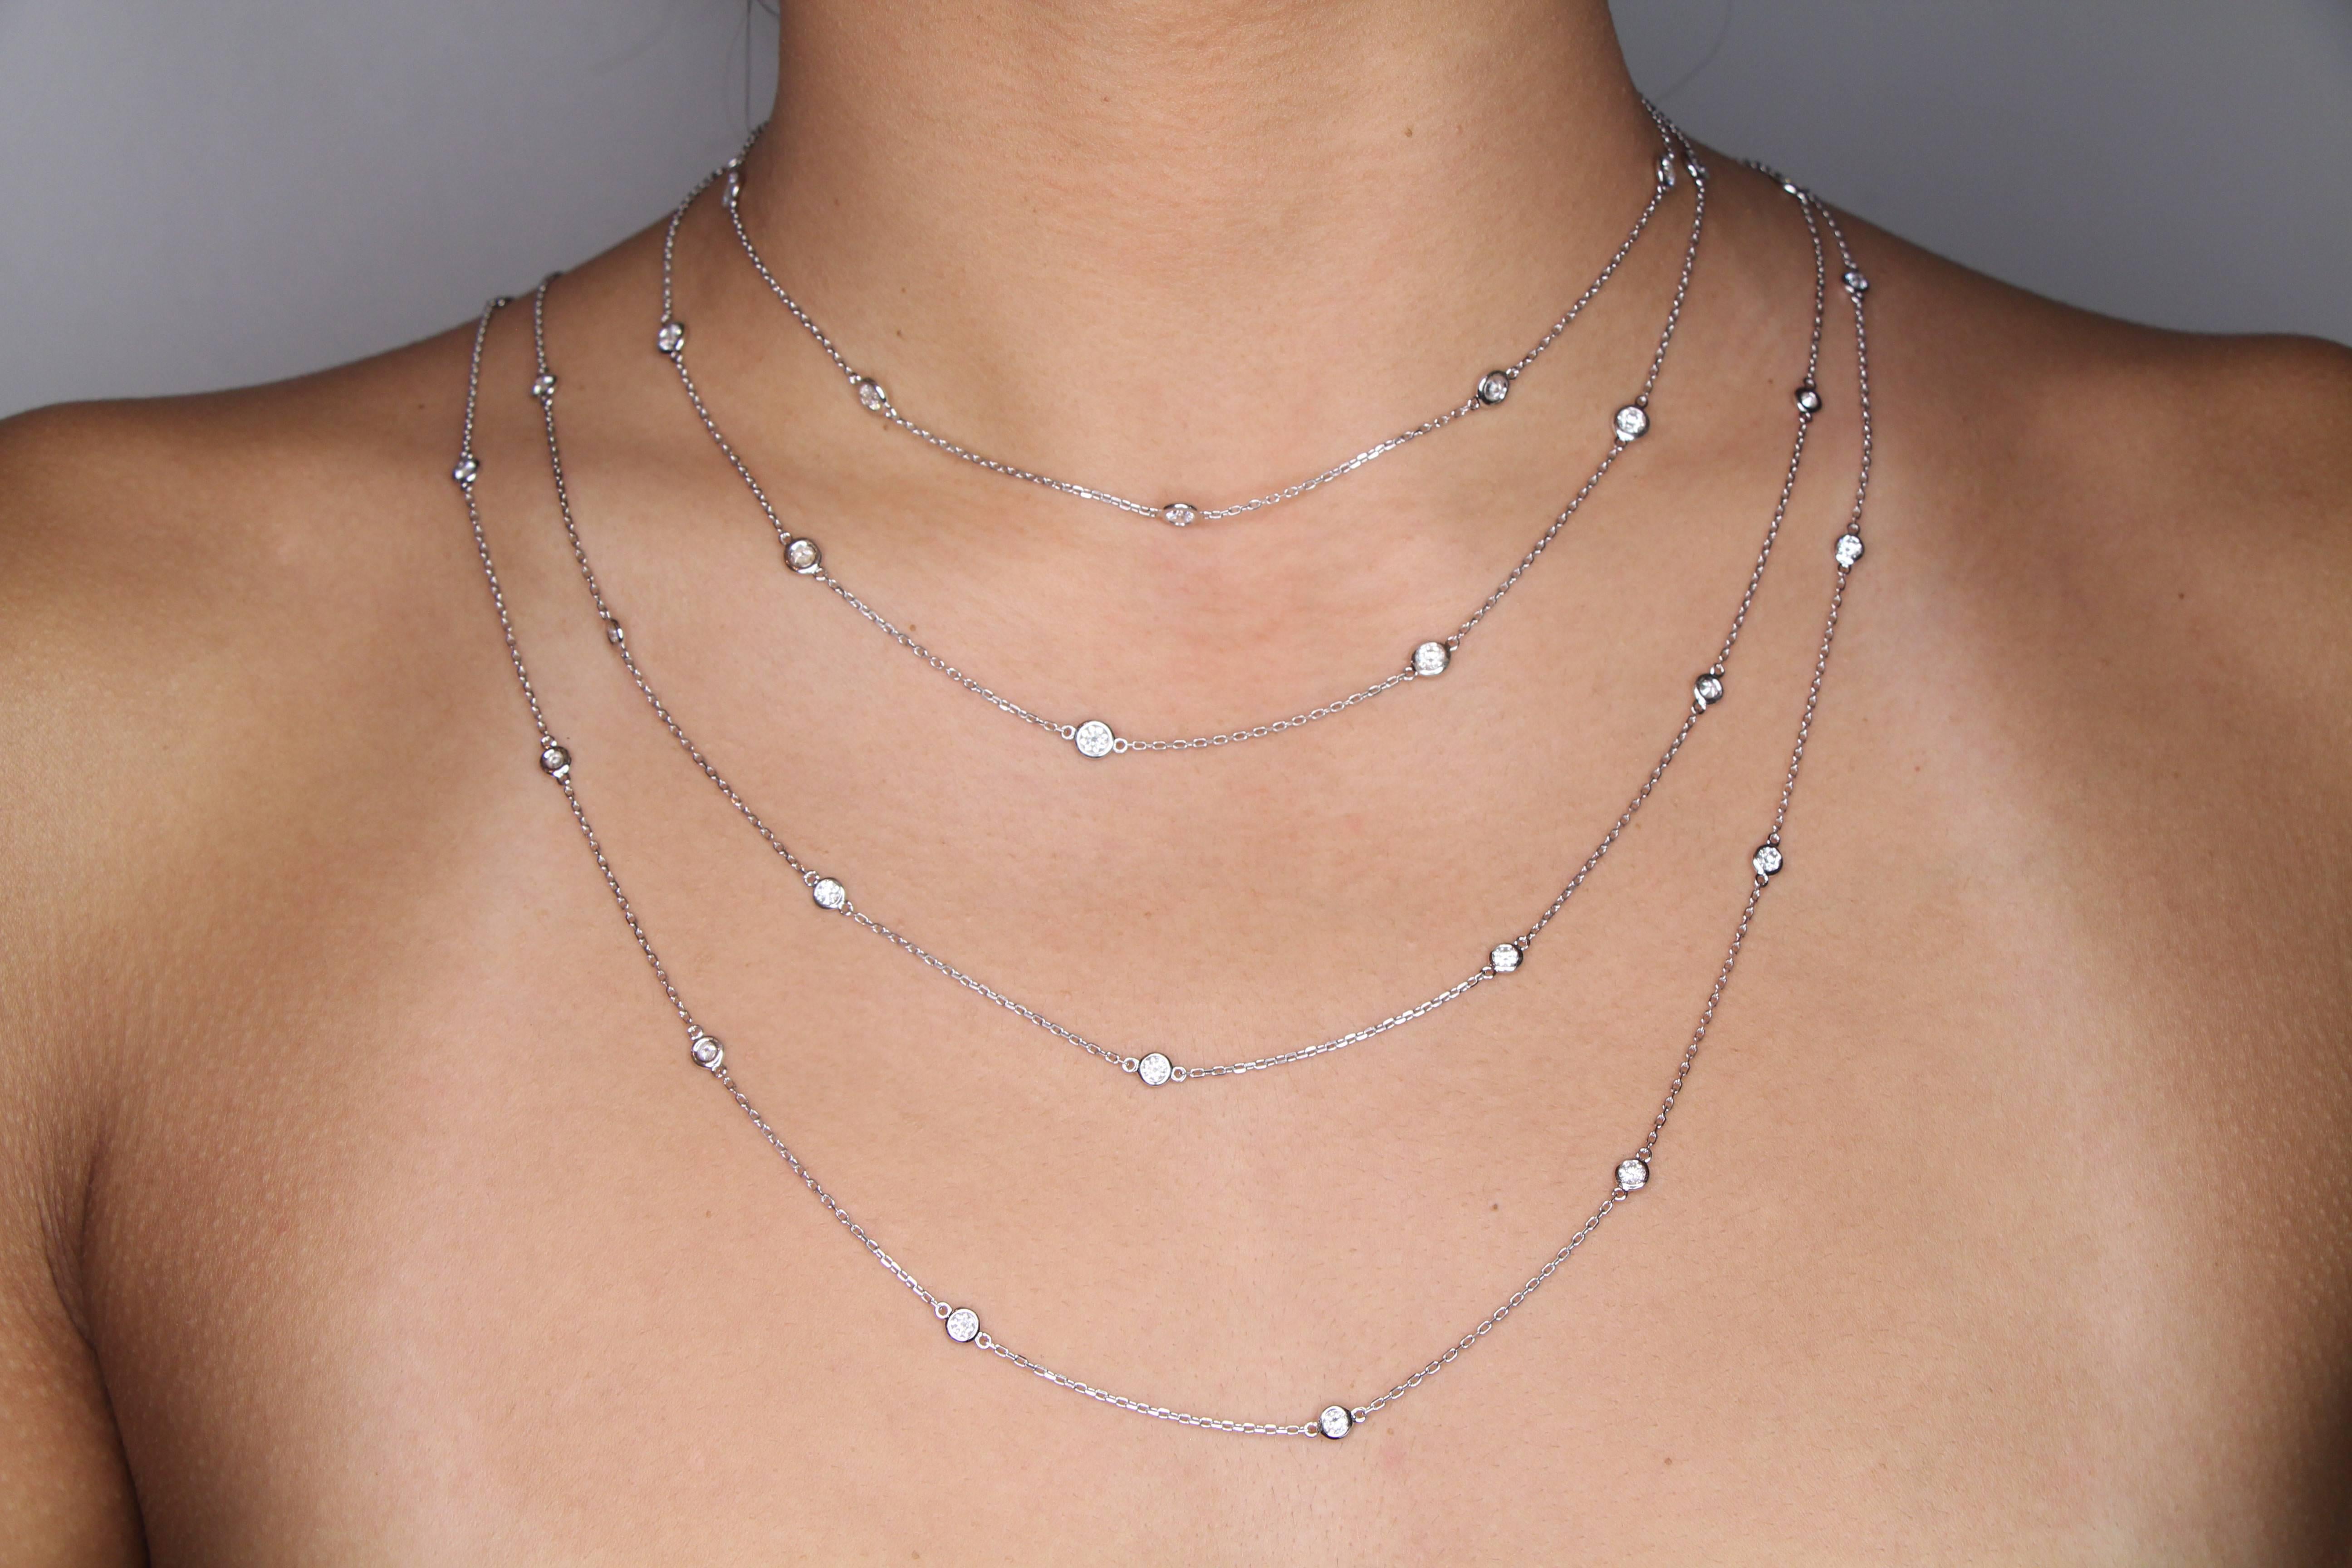 Long necklace mesuring 90 cm punctuated with 17 diamonds weighing 1,54 carats
White Gold 18K
GVS Diamonds
